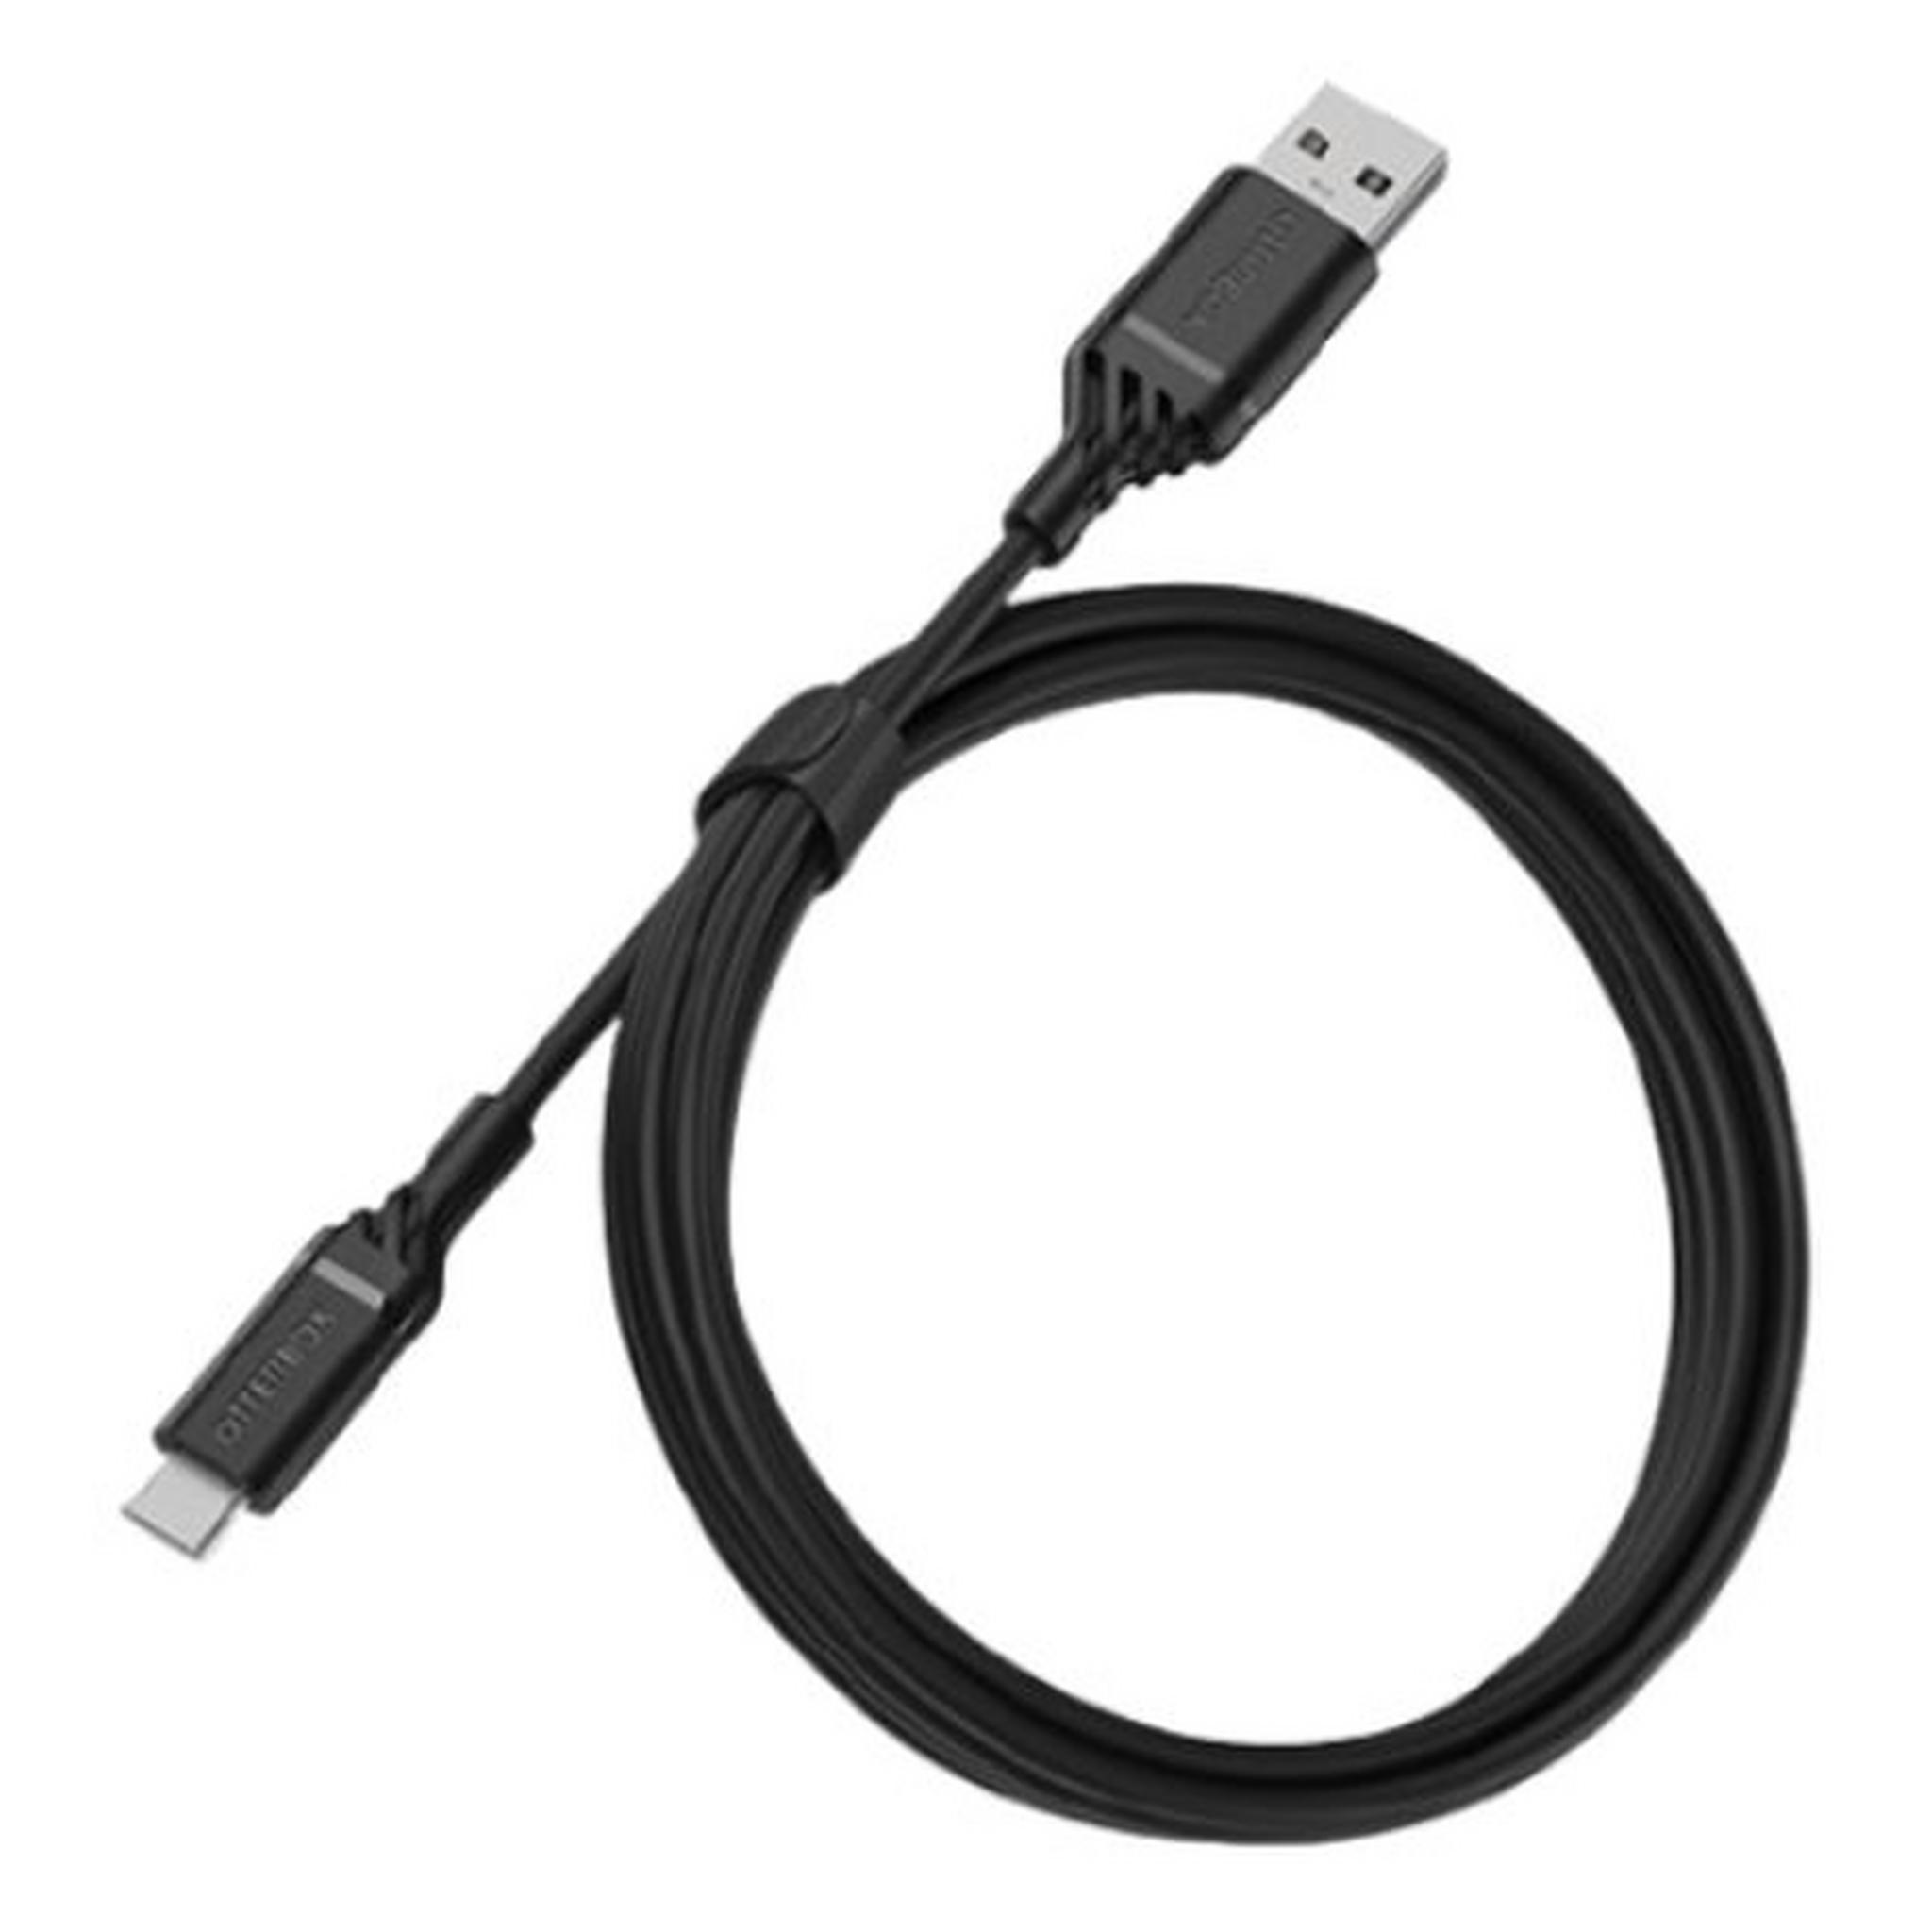 OtterBox USB-A to USB-C Cable 3-Meter (78-52538) - Black